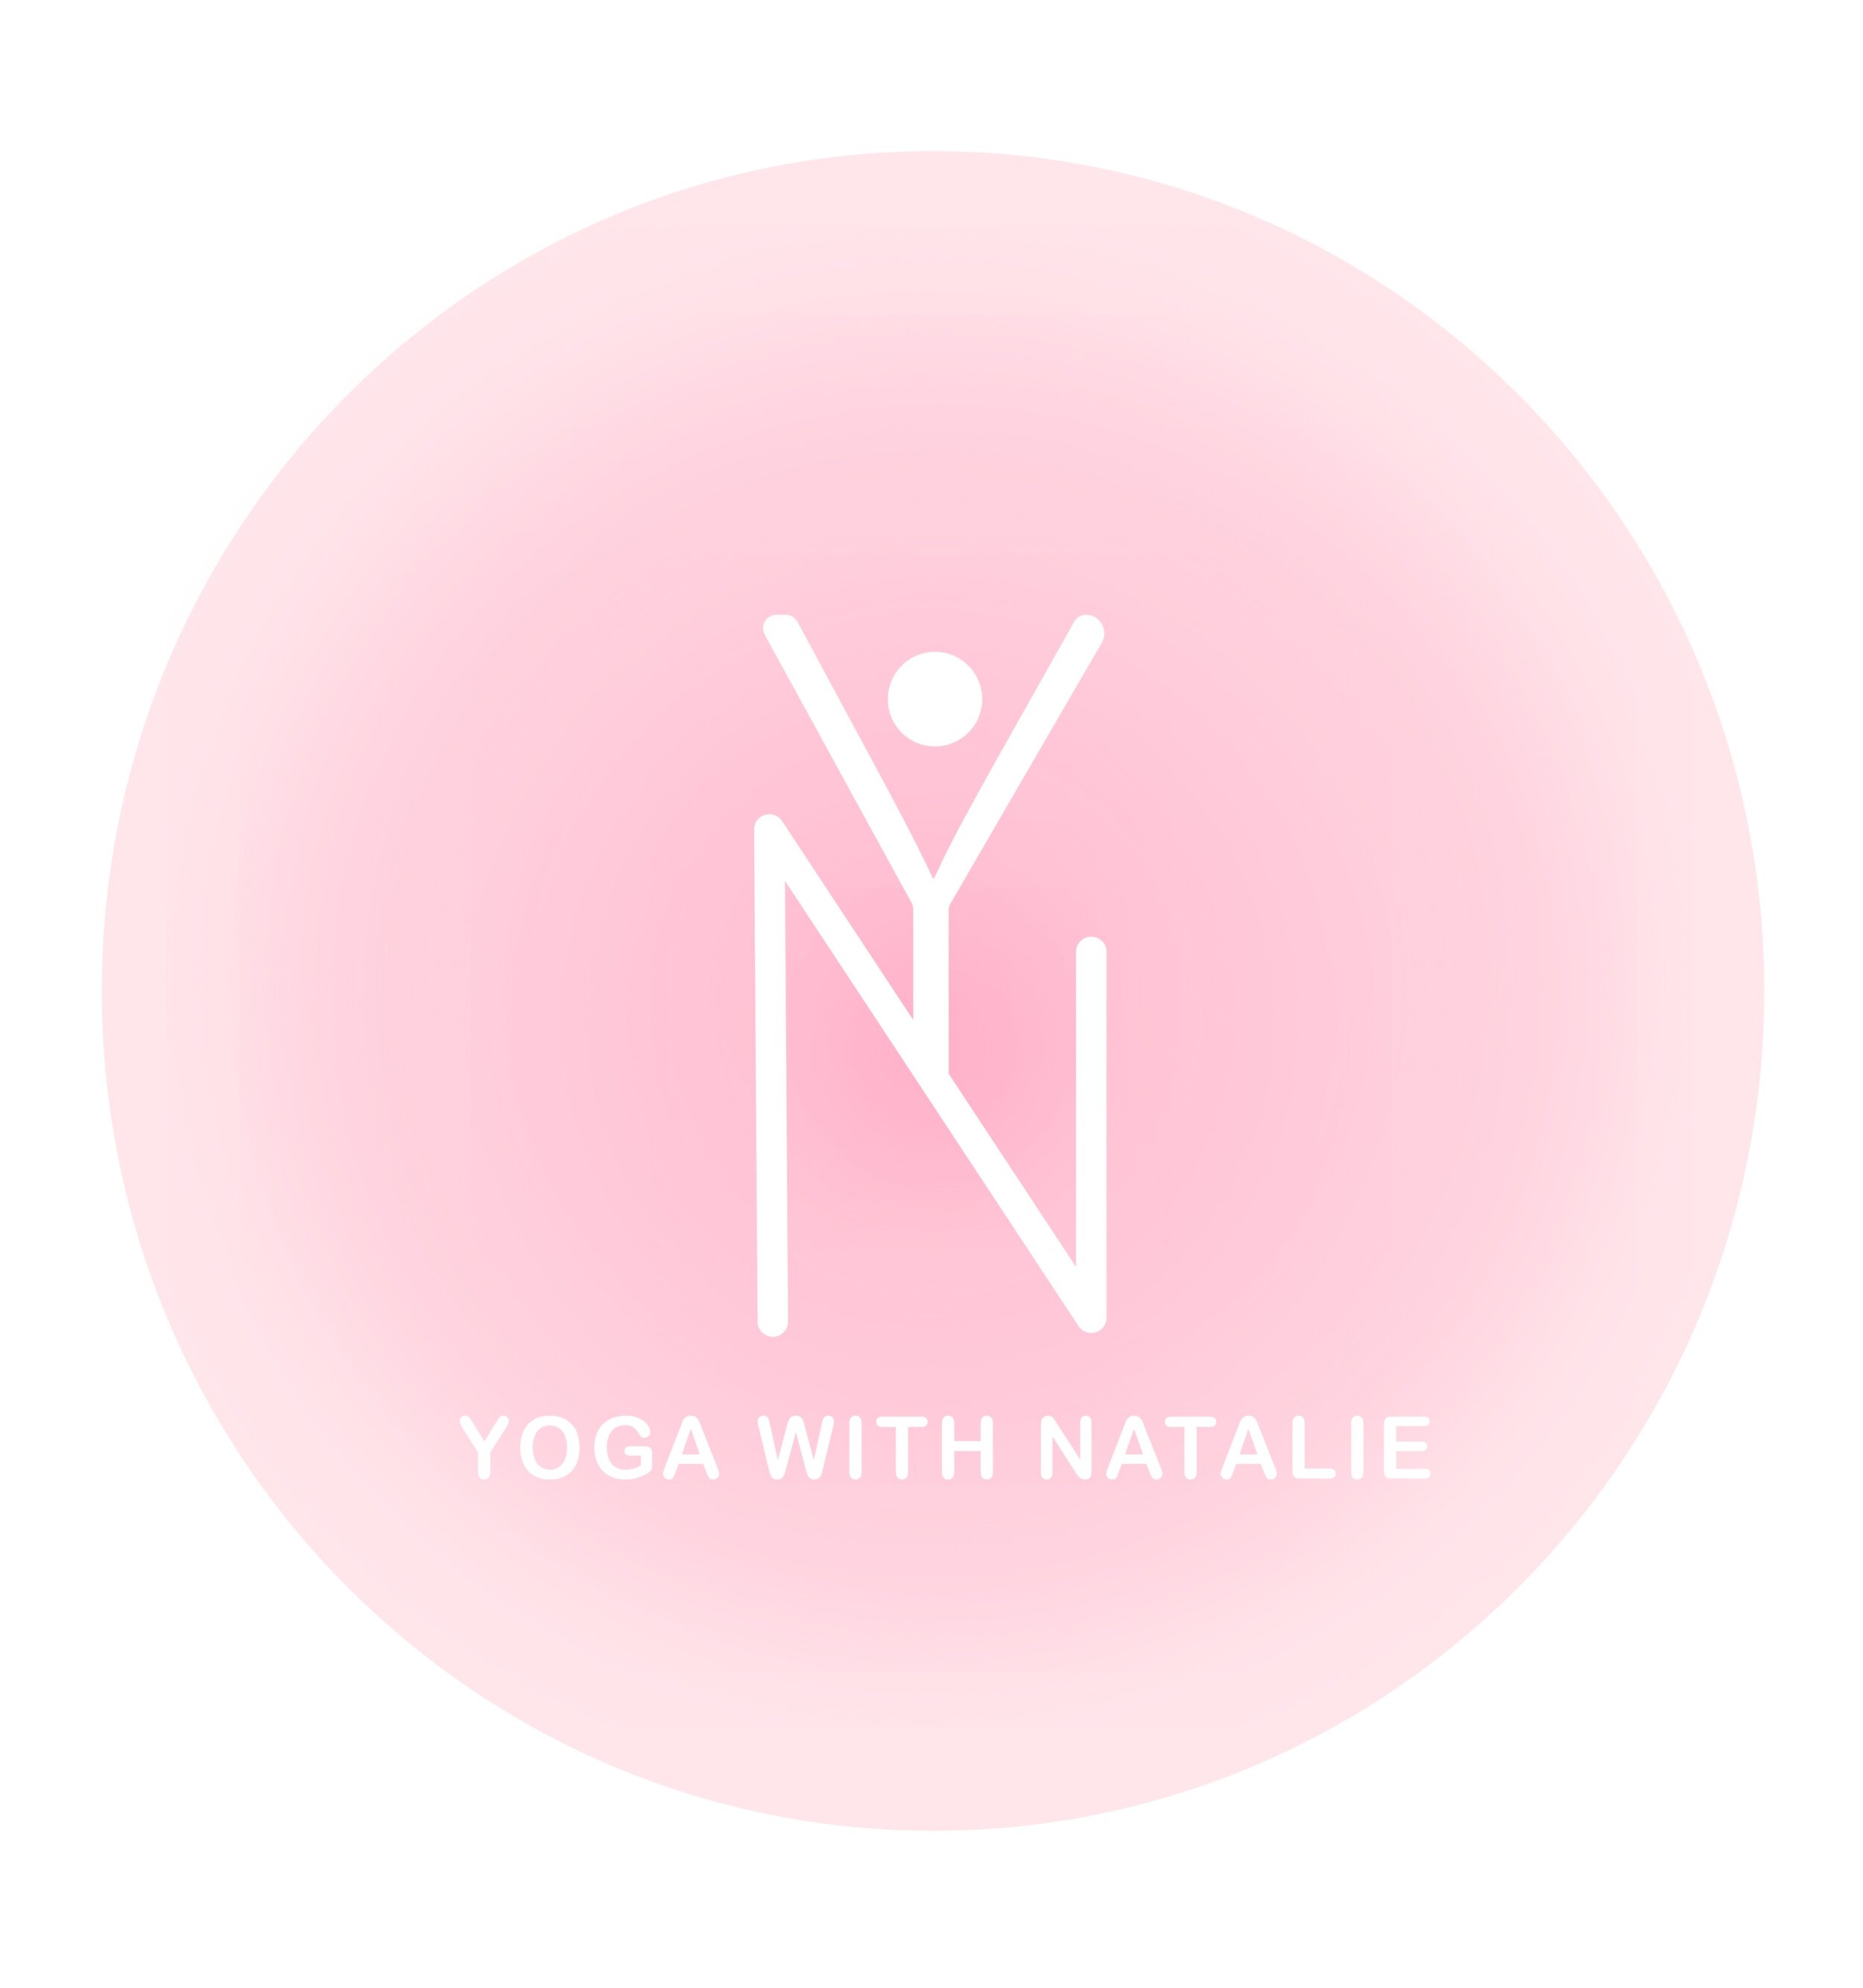 YOGA WITH NATALIE